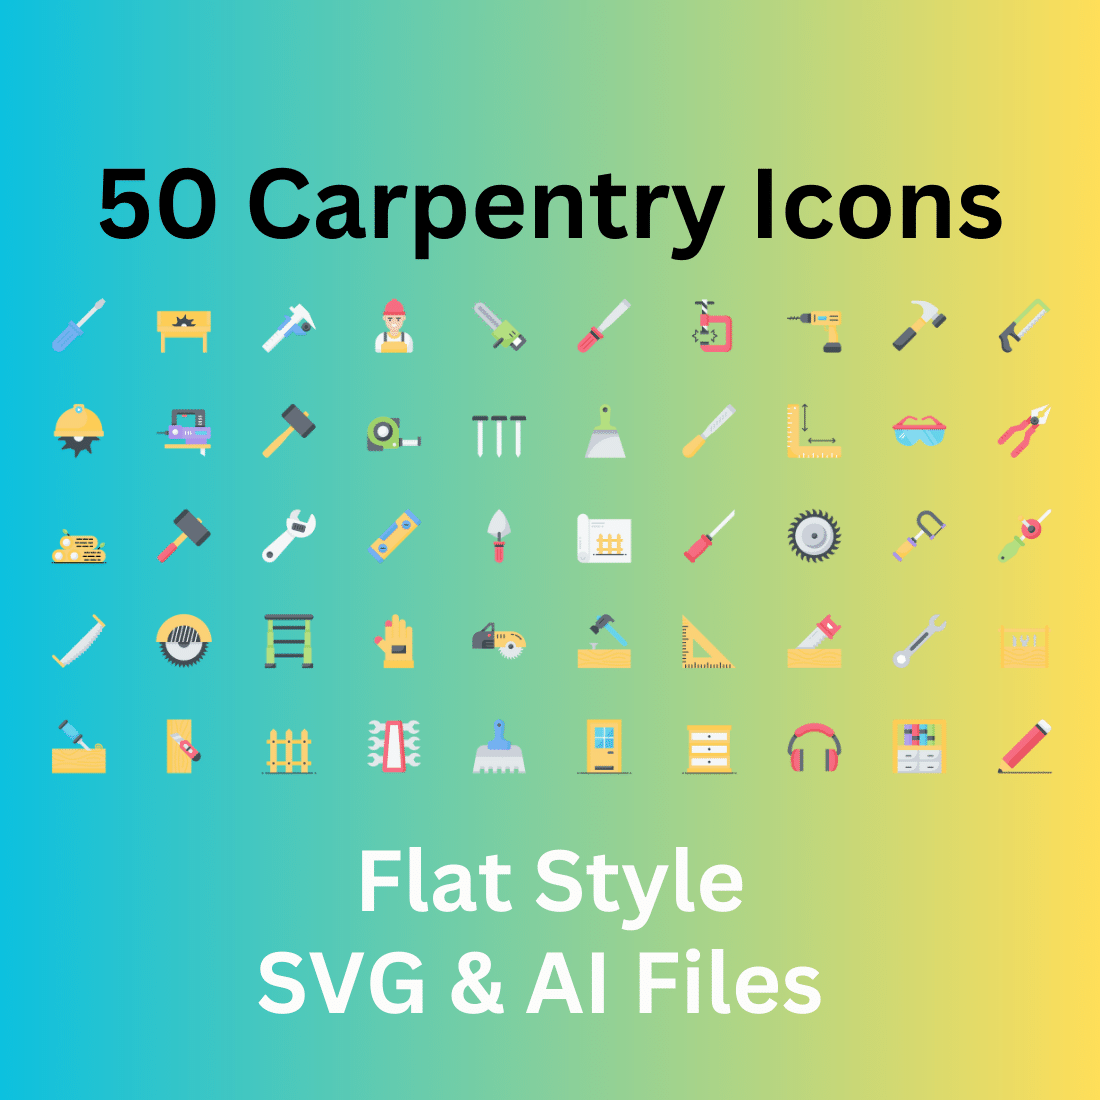 Carpentry Icon Set 50 Flat Icons - SVG And AI Files cover image.